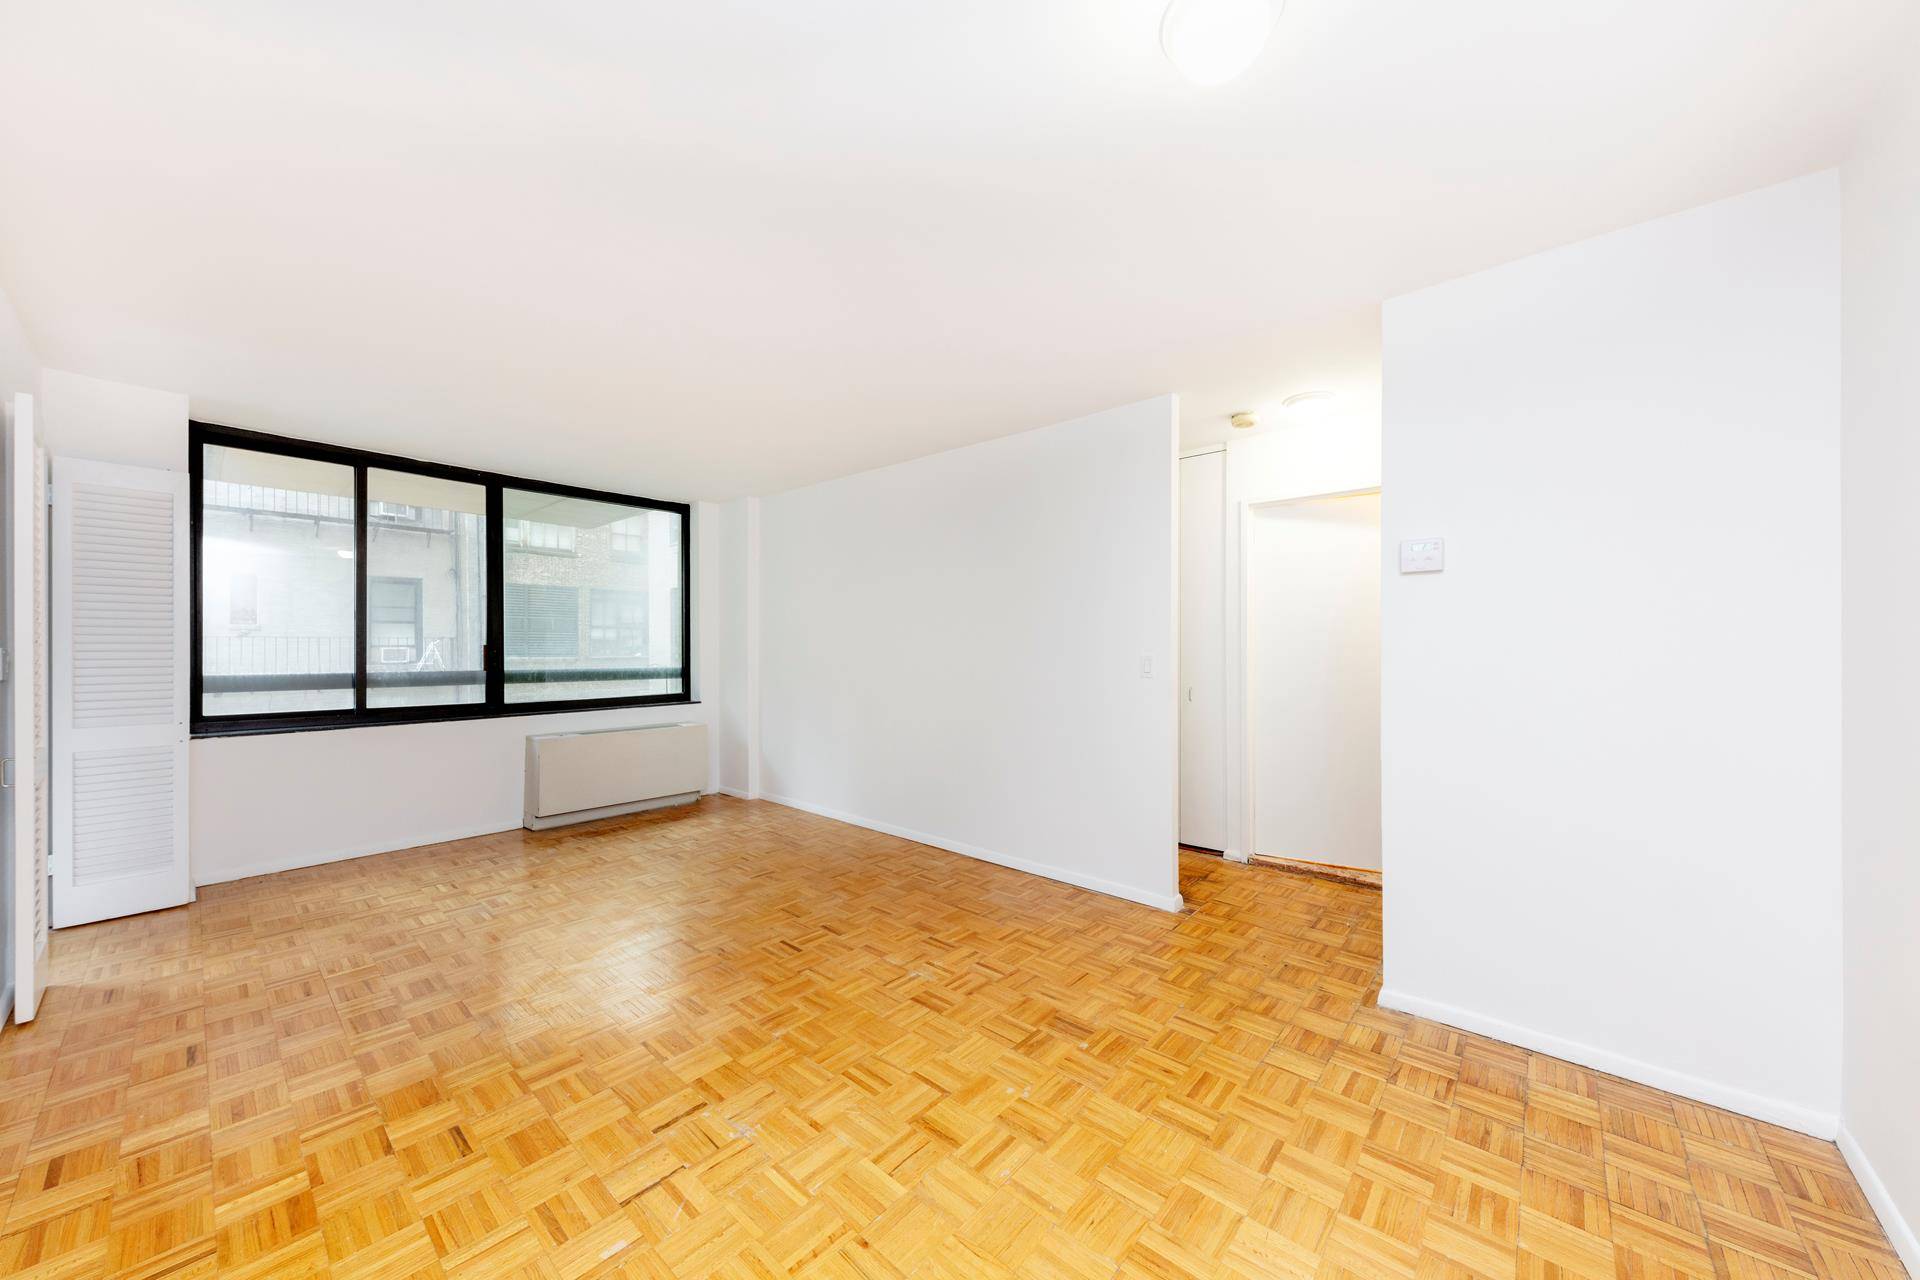 Converted 1 BR for rent in full service building !